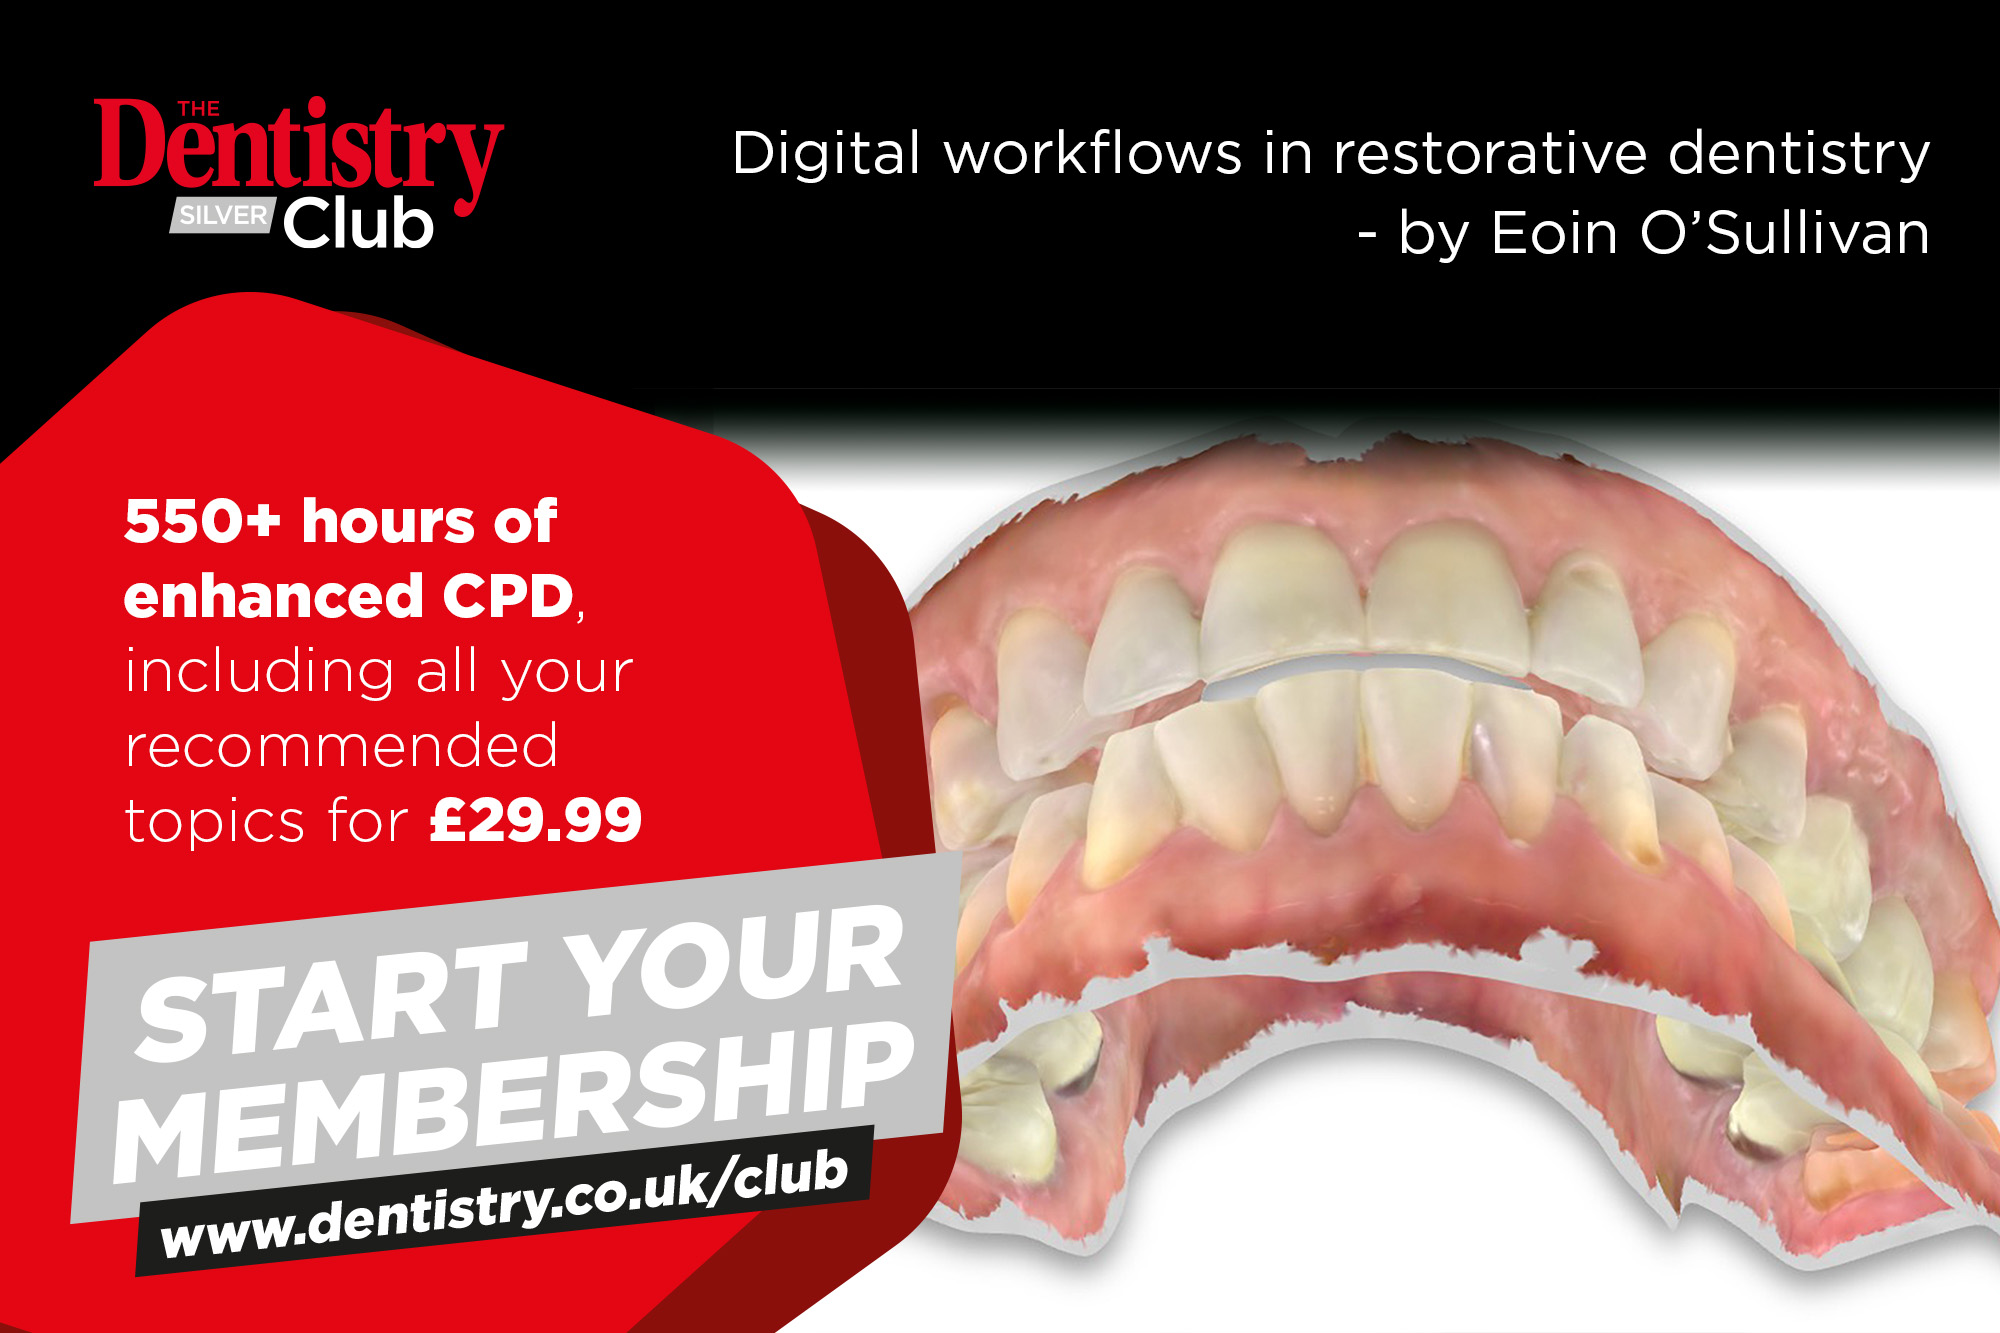 Eoin O’Sullivan explains how digital workflows in restorative dentistry represent a paradigm shift in the way we provide complex restorative dentistry.